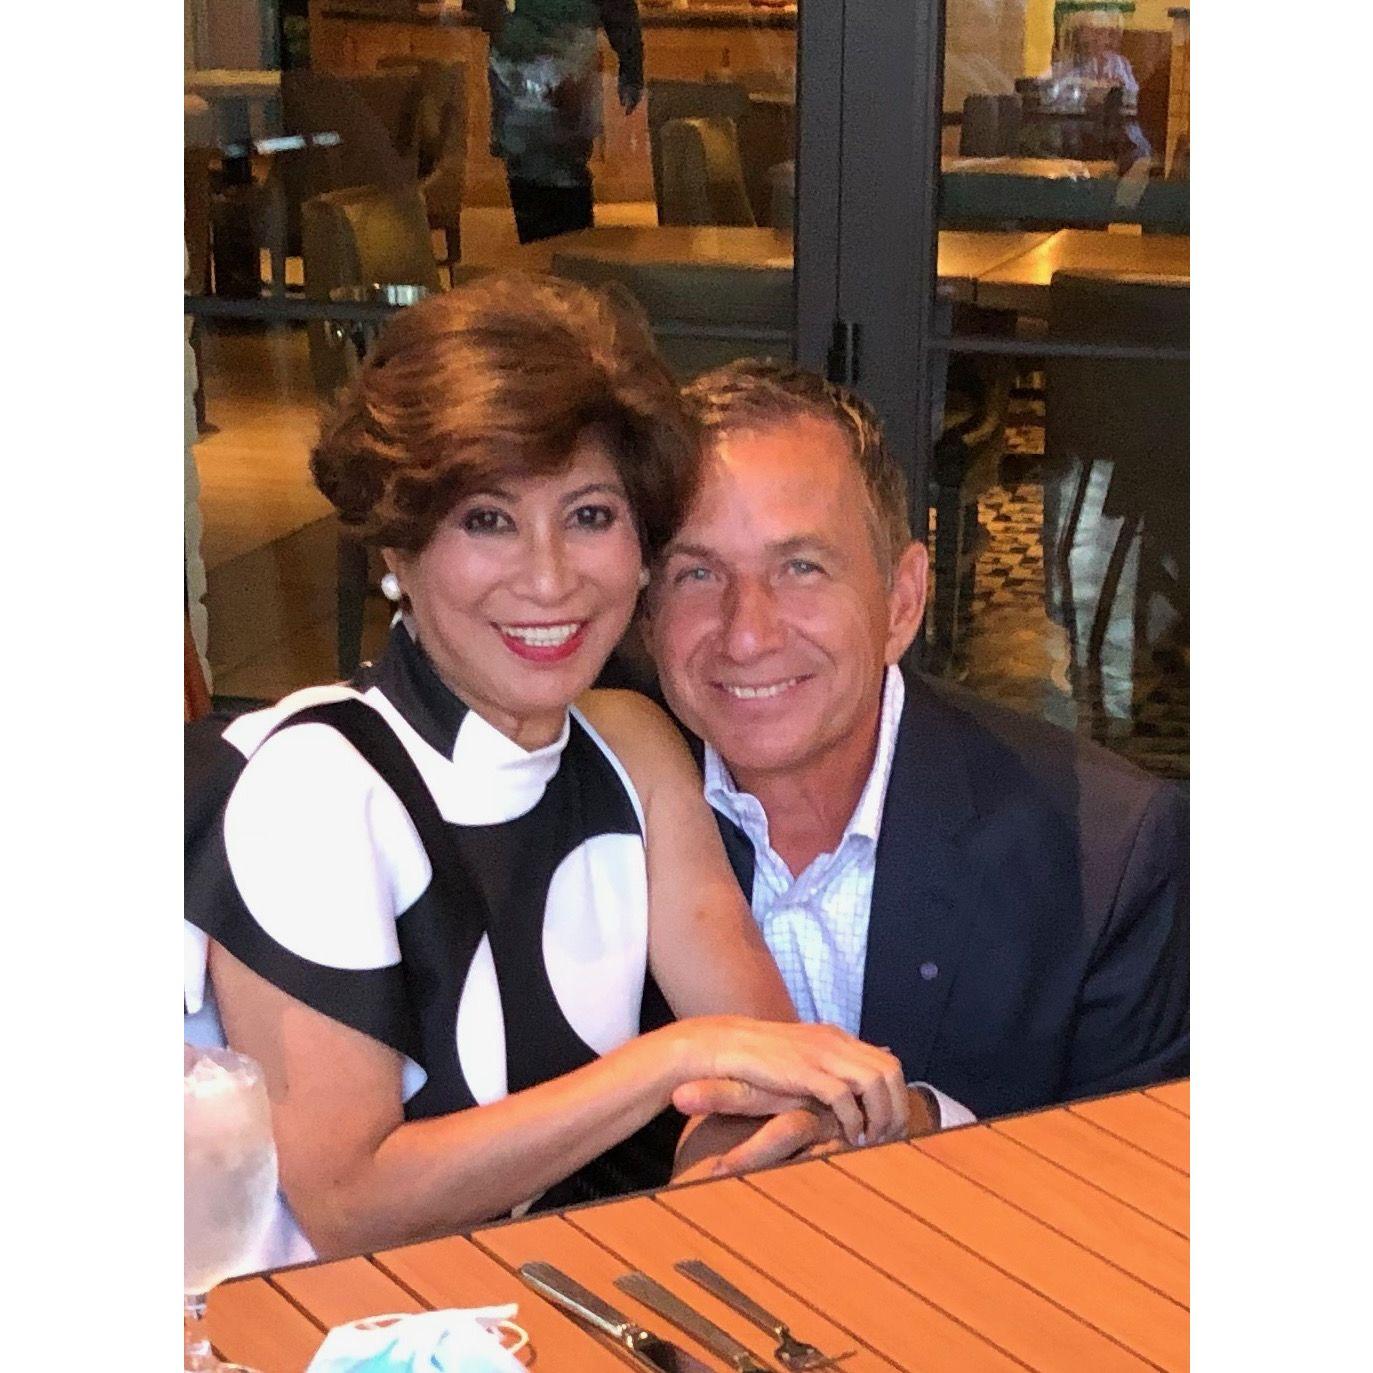 Our 2nd date @ Terranea to celebrate Bruce's birthday- Aug. 2019